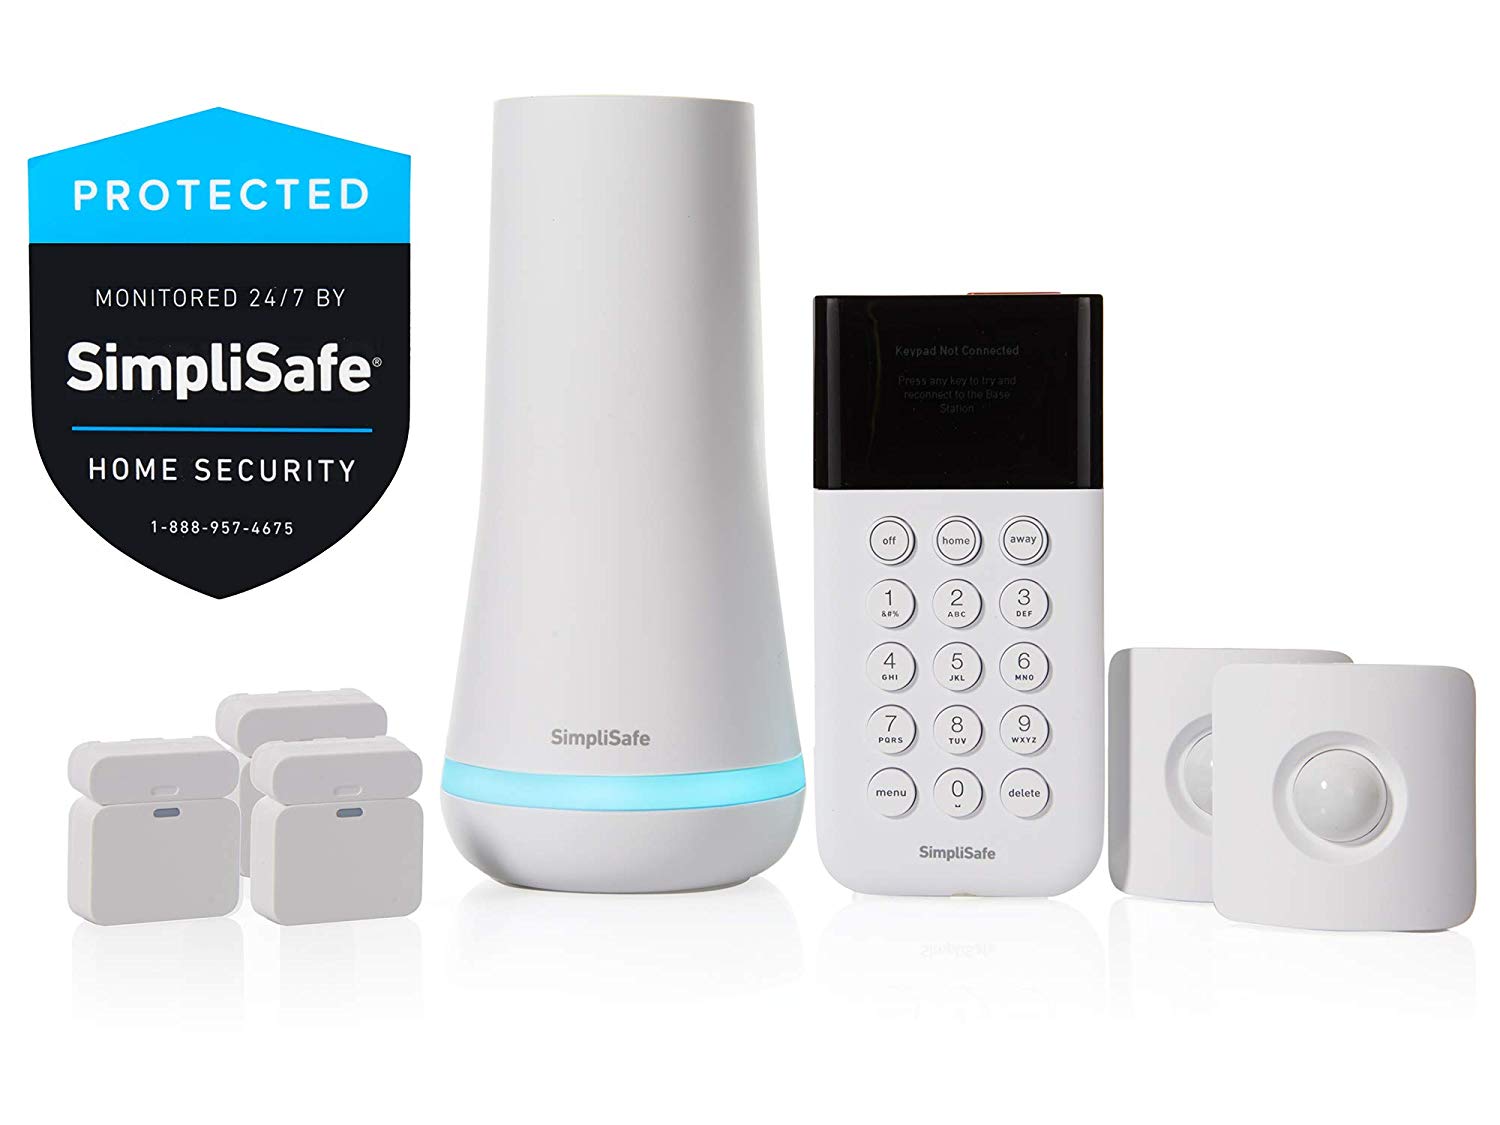 Who is SimpliSafe owned by?